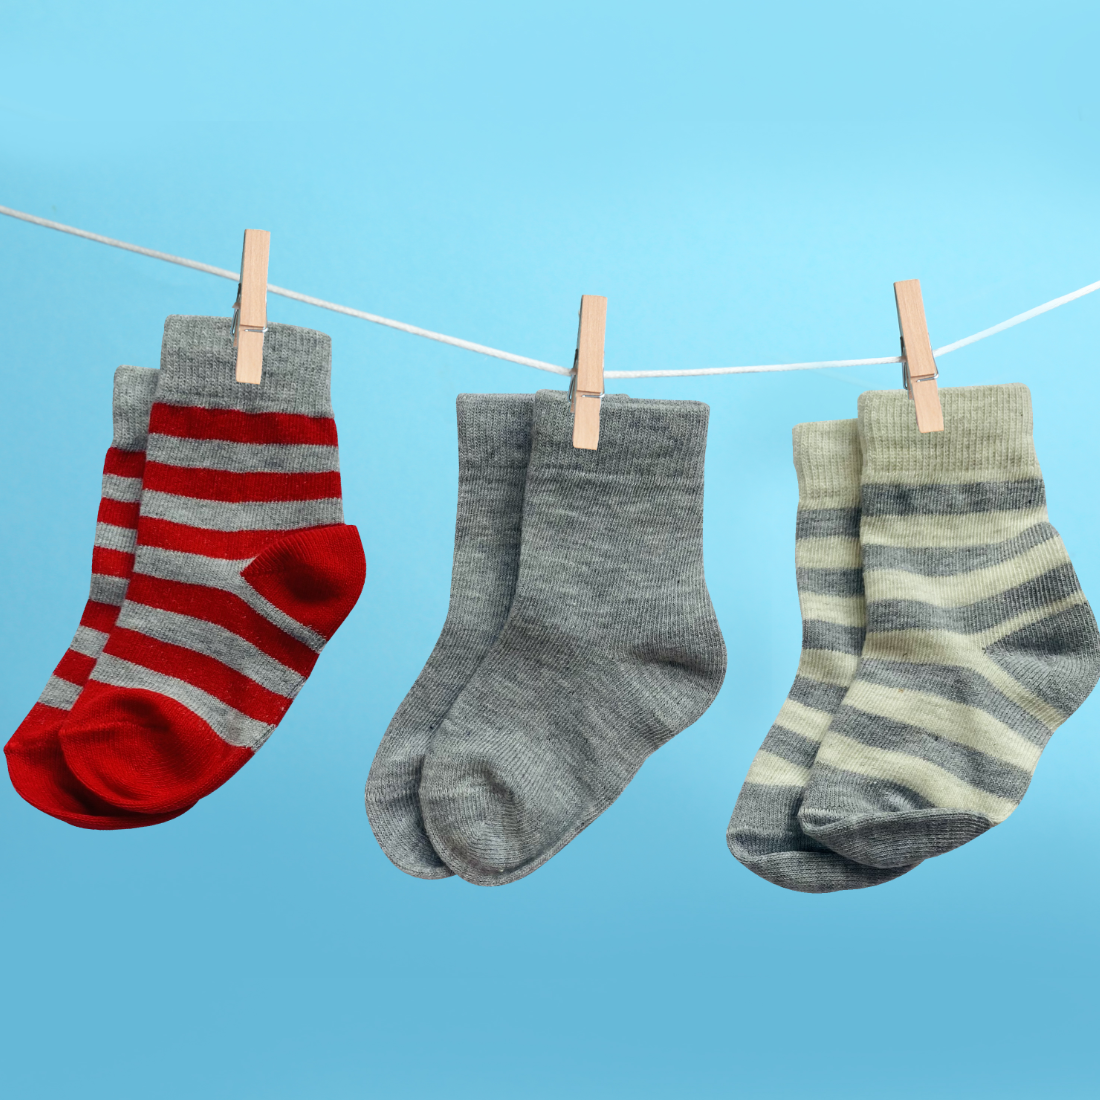 Antibacterial Baby Socks - Elasticated & Ankle Length - (12-24 Months) Unisex Grey Striped & Solid